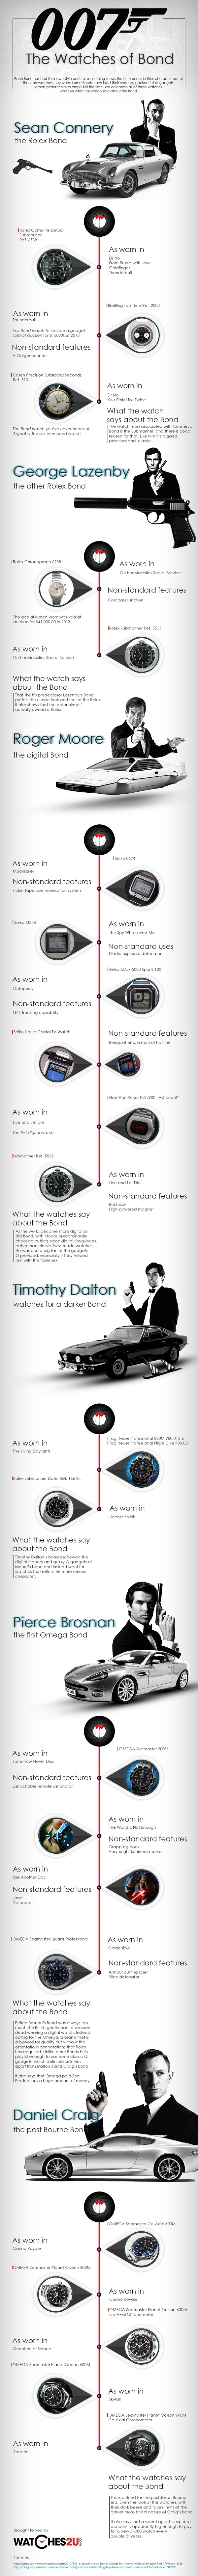 the watches of James bond infographic